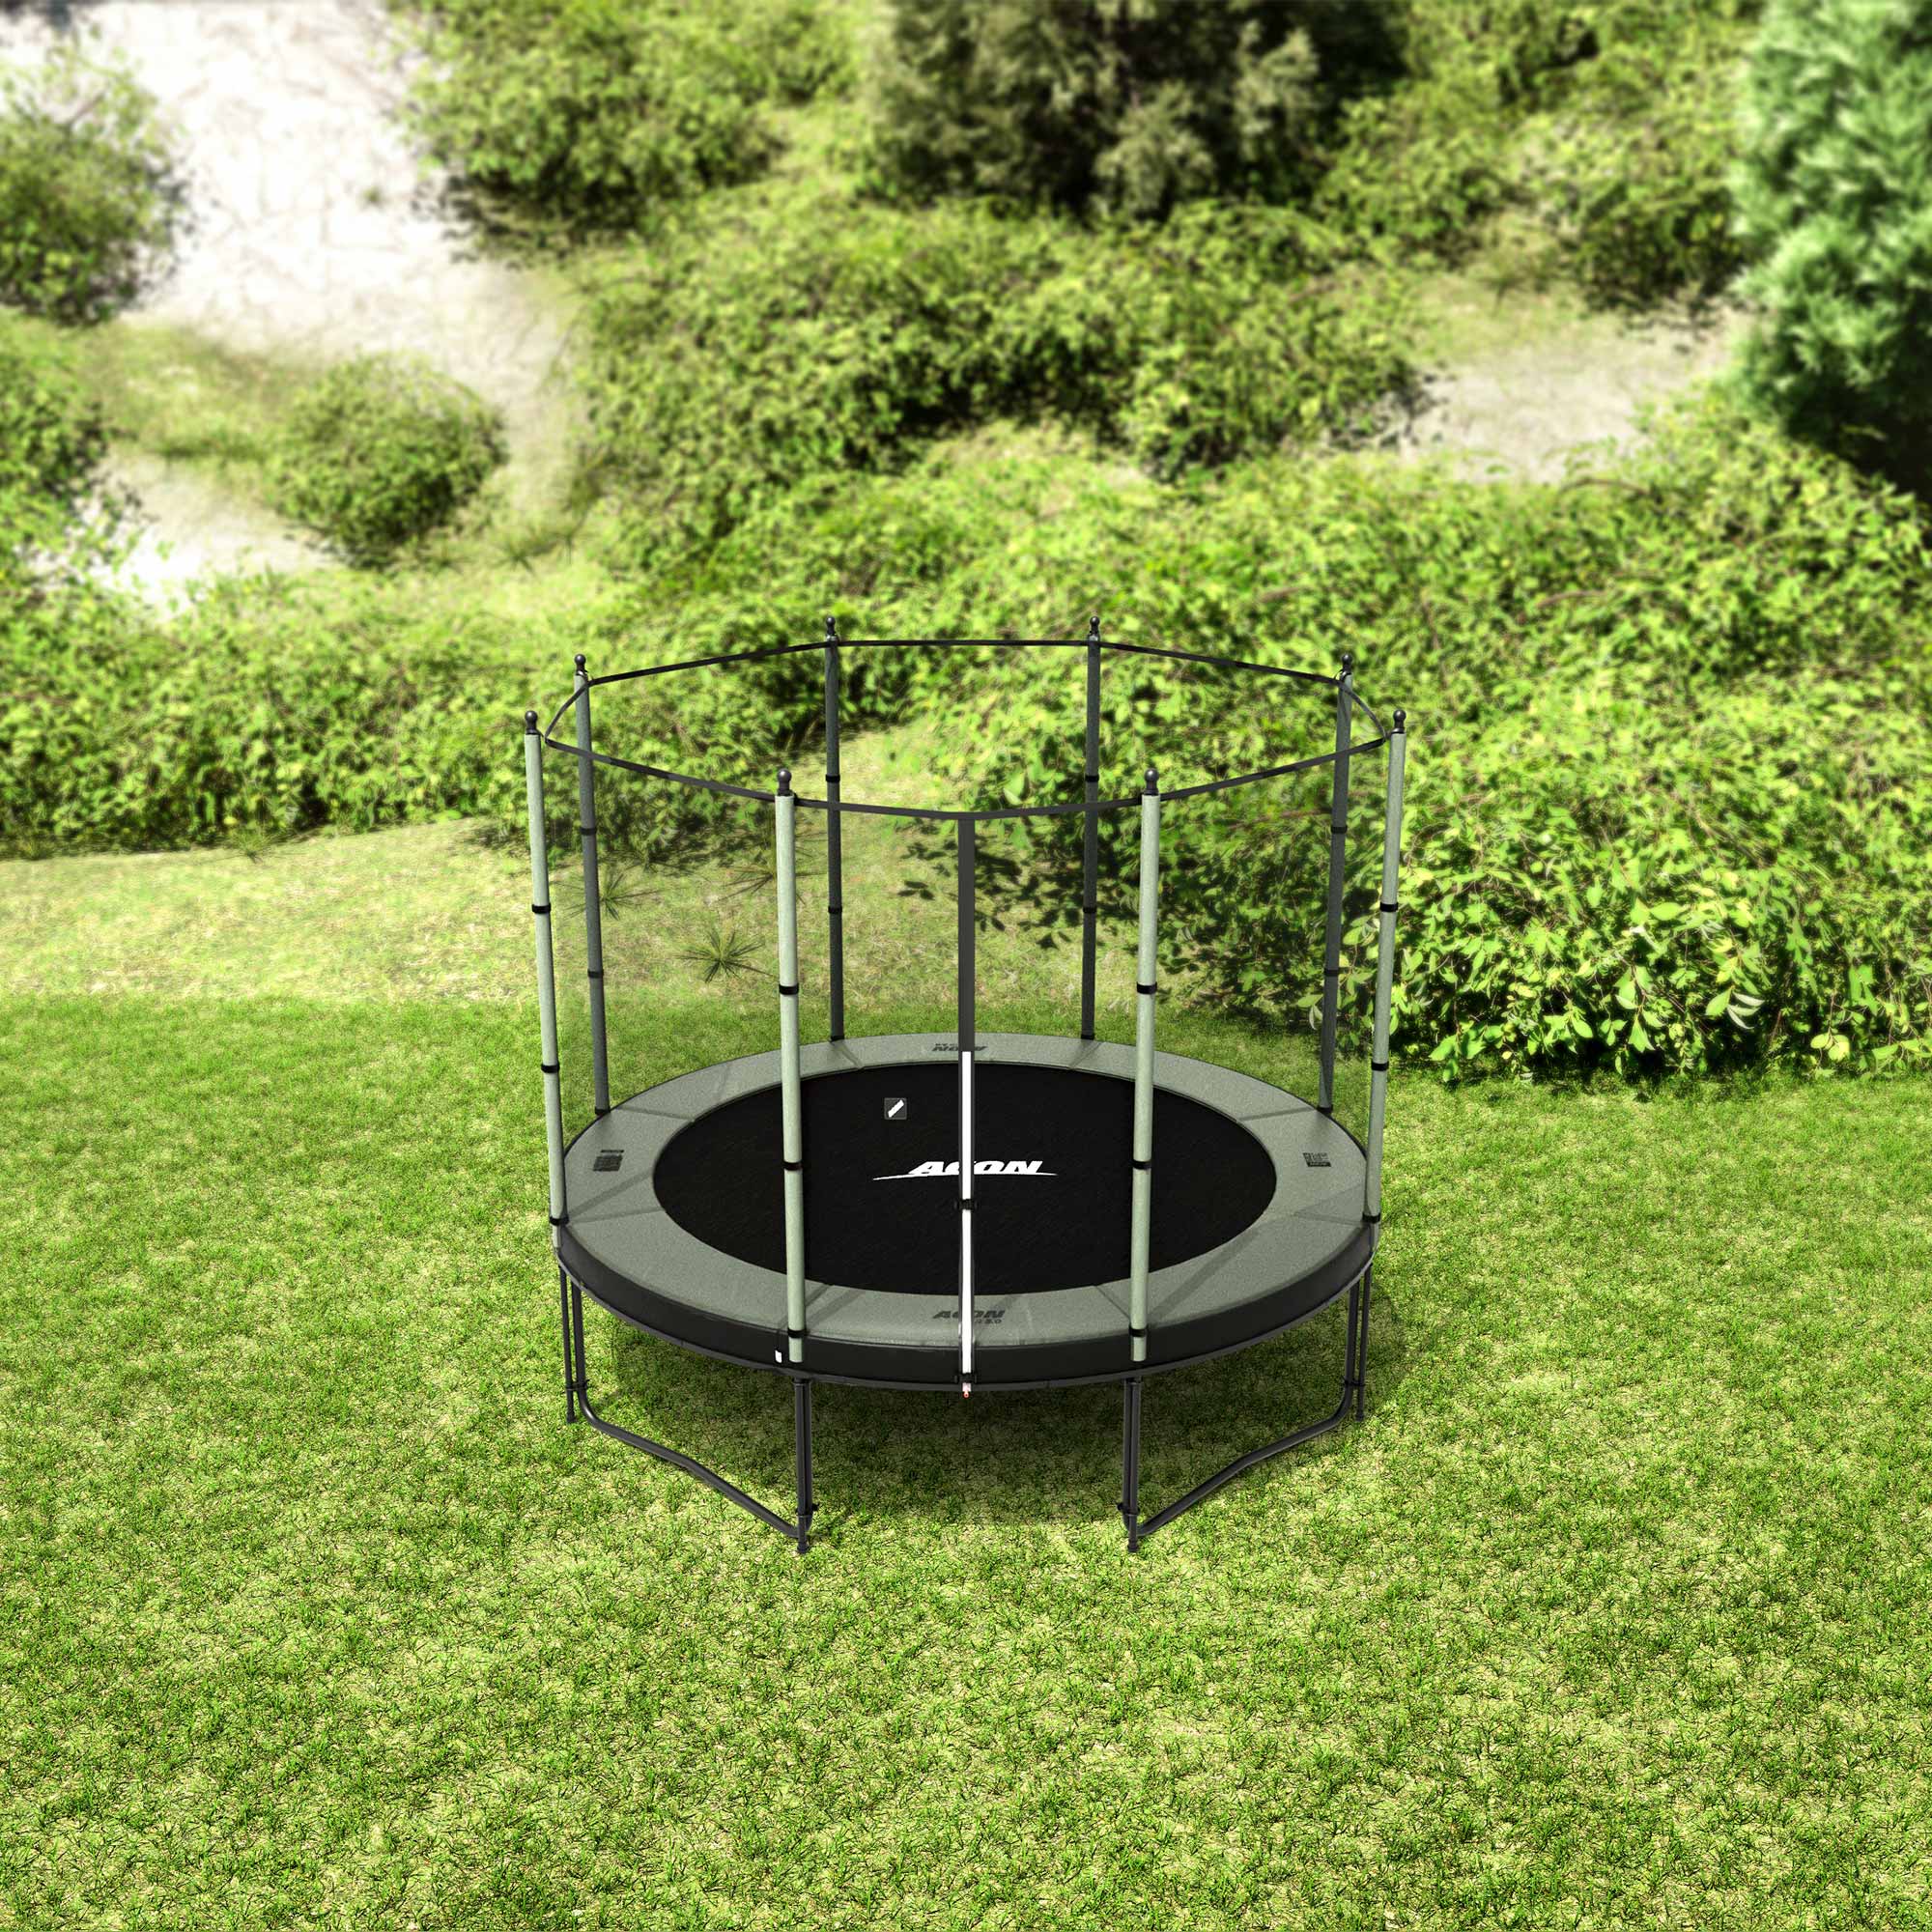 Upper Bounce 55 Inch Kid Friendly Trampoline and Enclosure Set Equipped  With for sale online